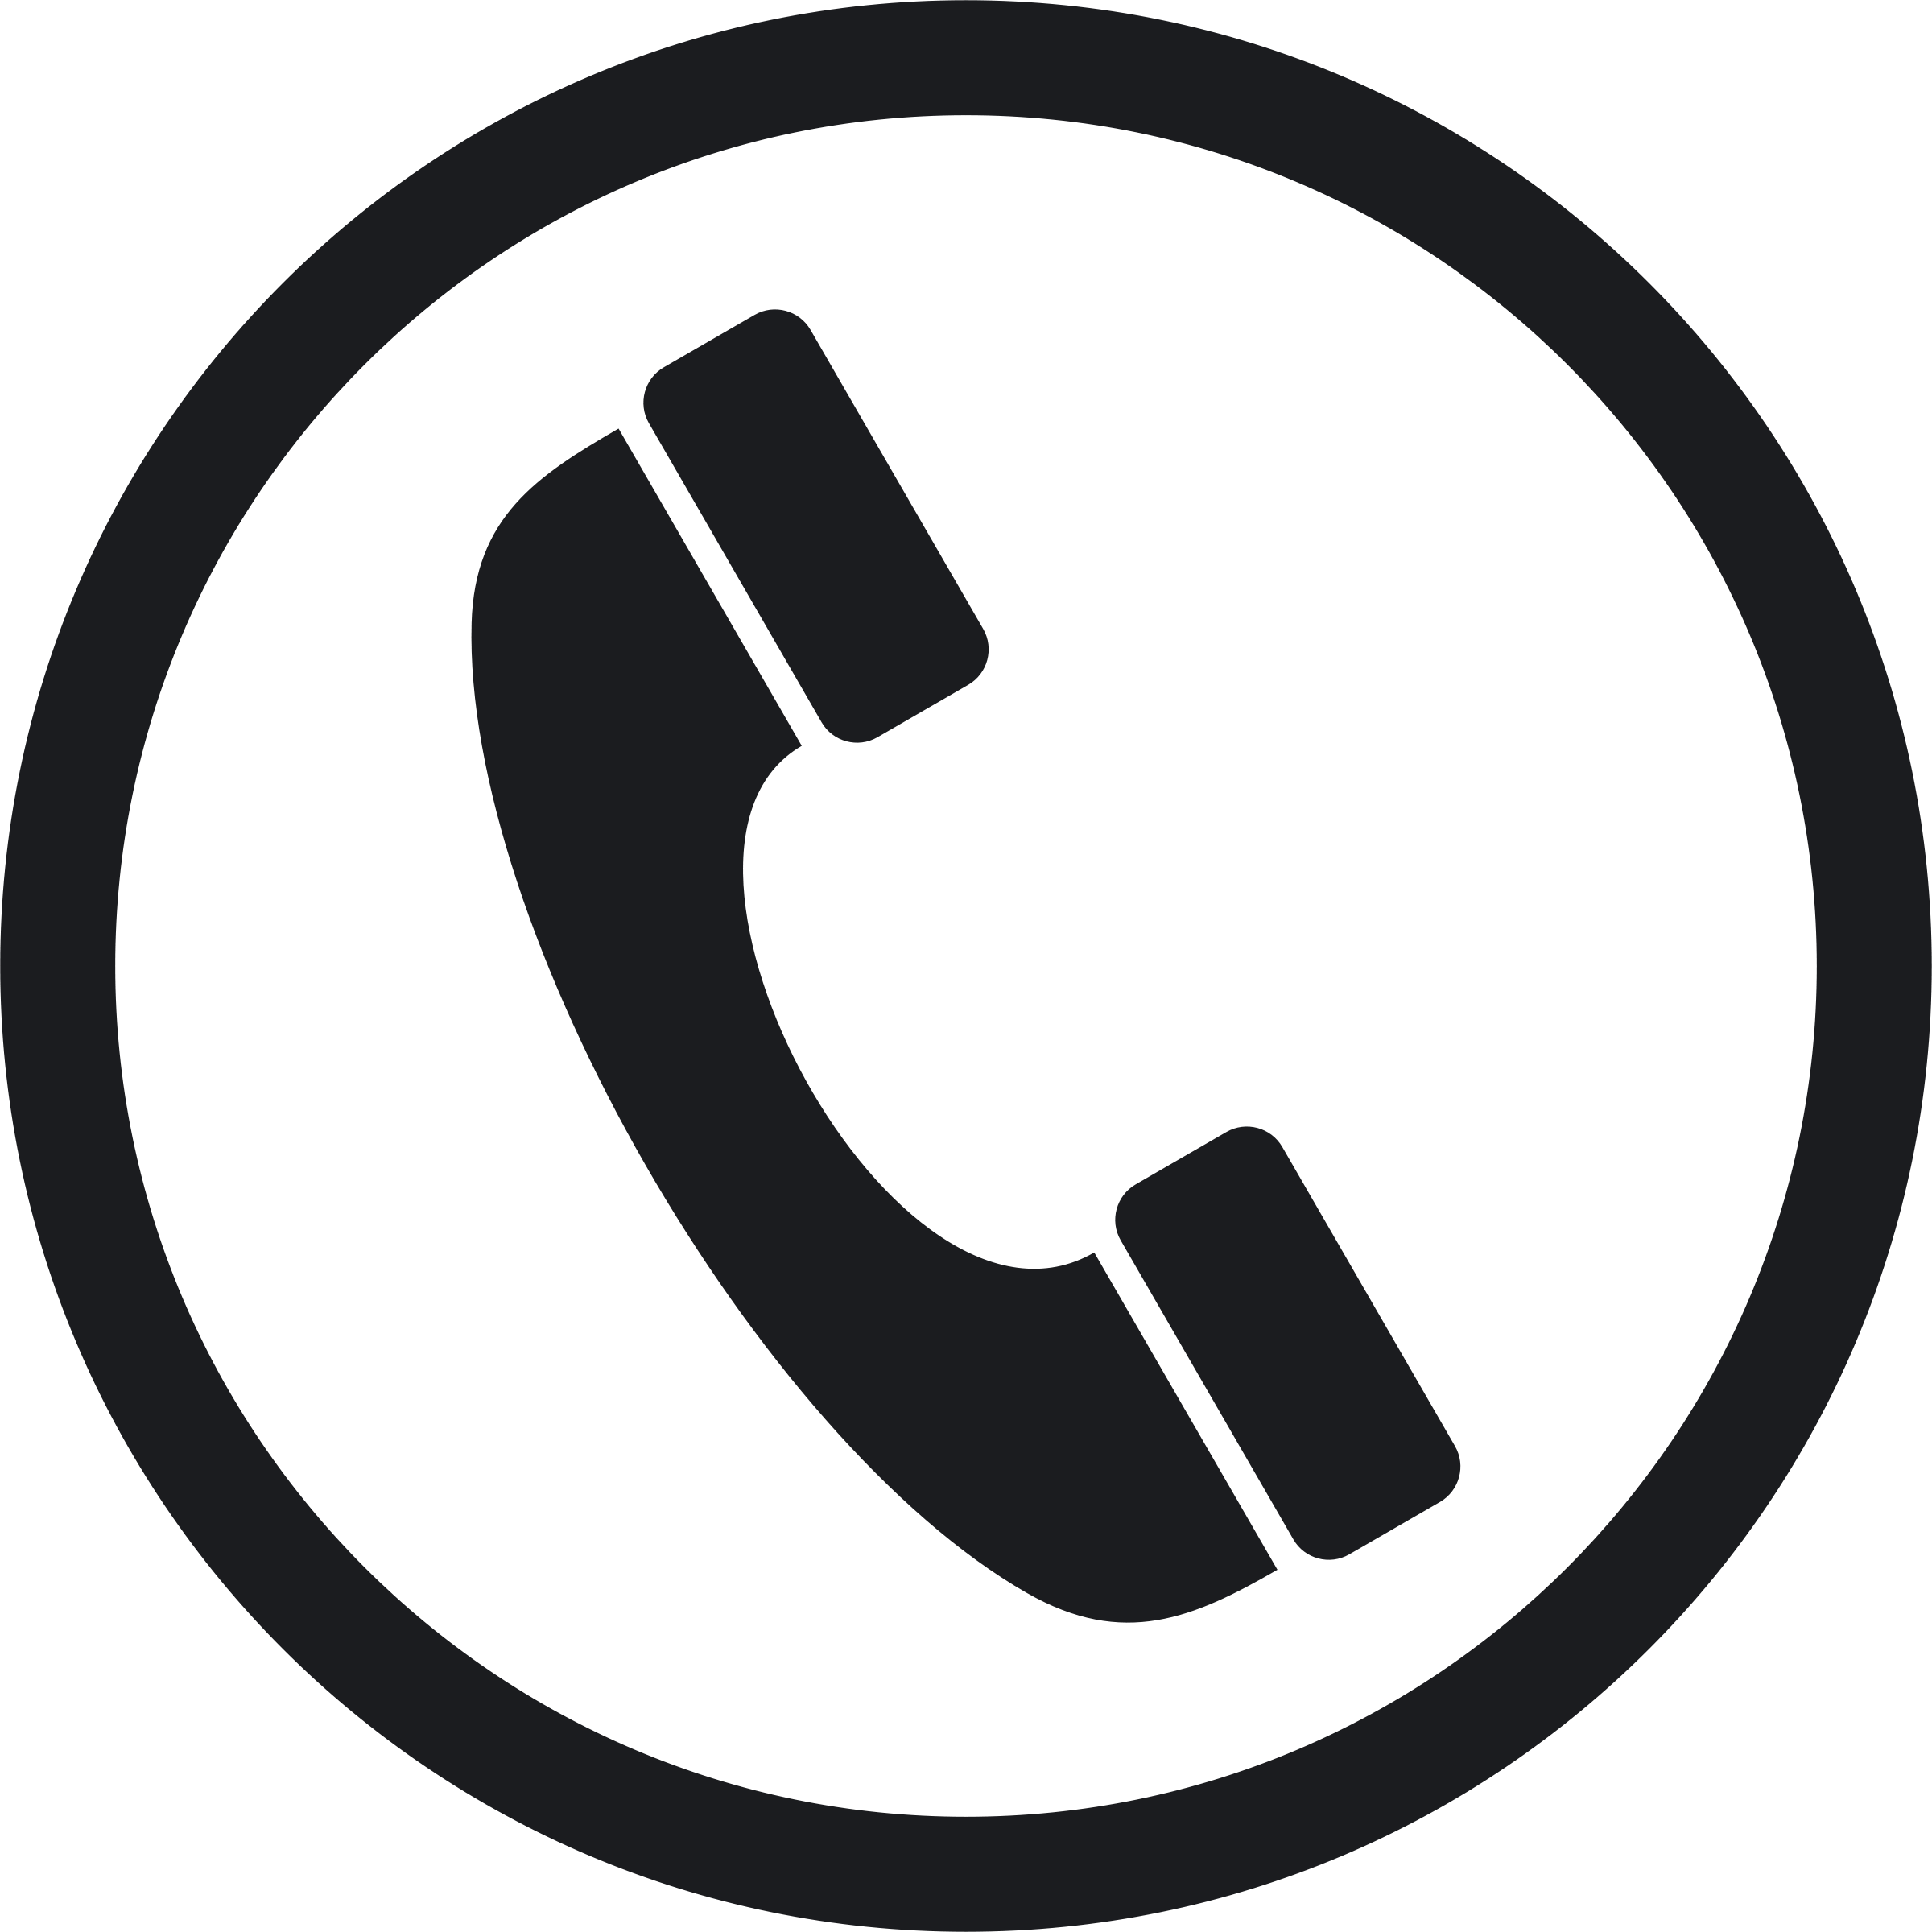 Telephone Phone Icon | Clipart Panda - Free Clipart Images